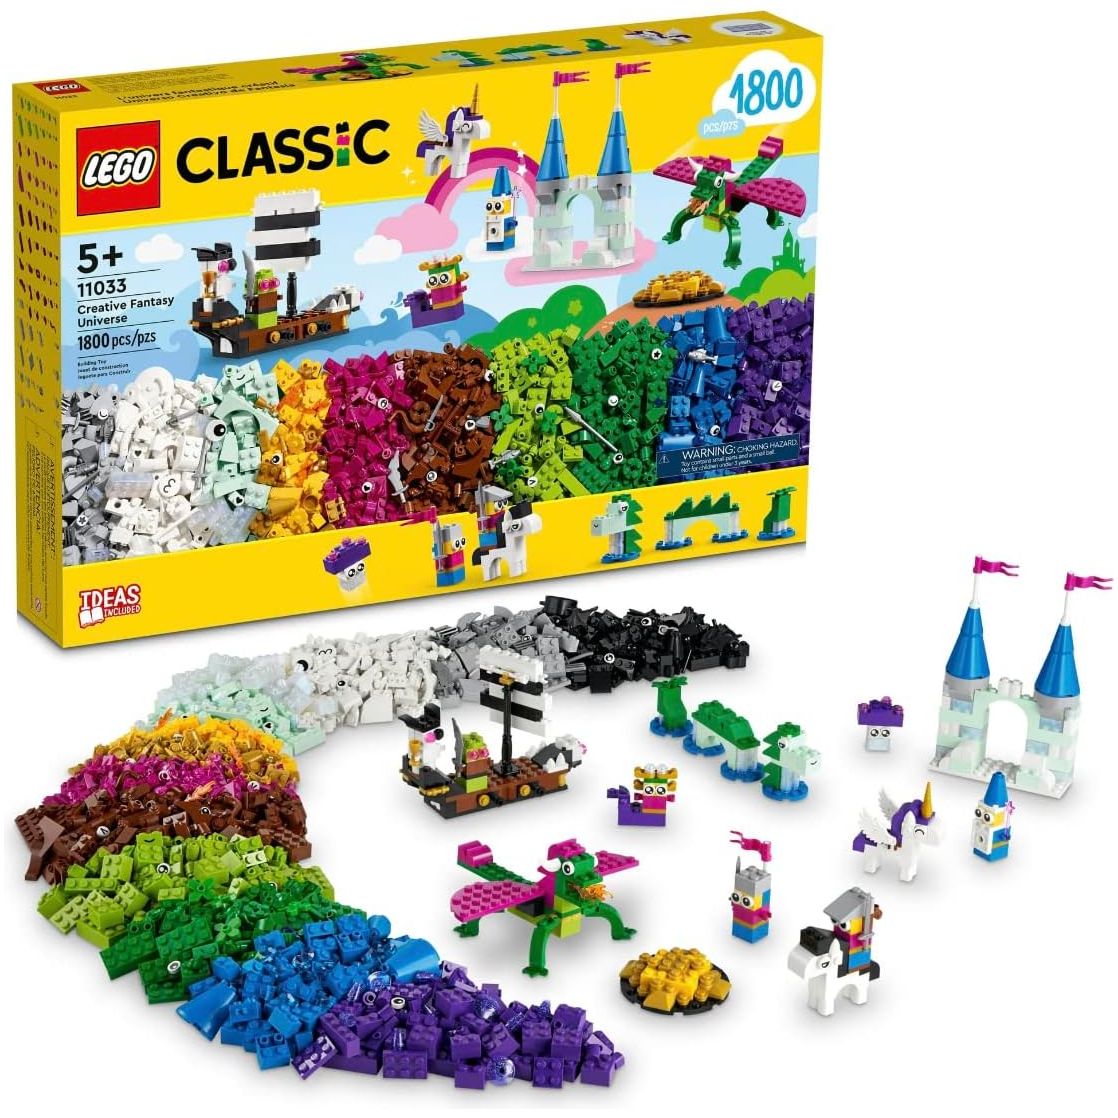 Lego 11033 Classic Creative Fantasy Universe Set, Building Adventure with Unicorn Toy, Castle, Dragon and Pirate Ship Builds